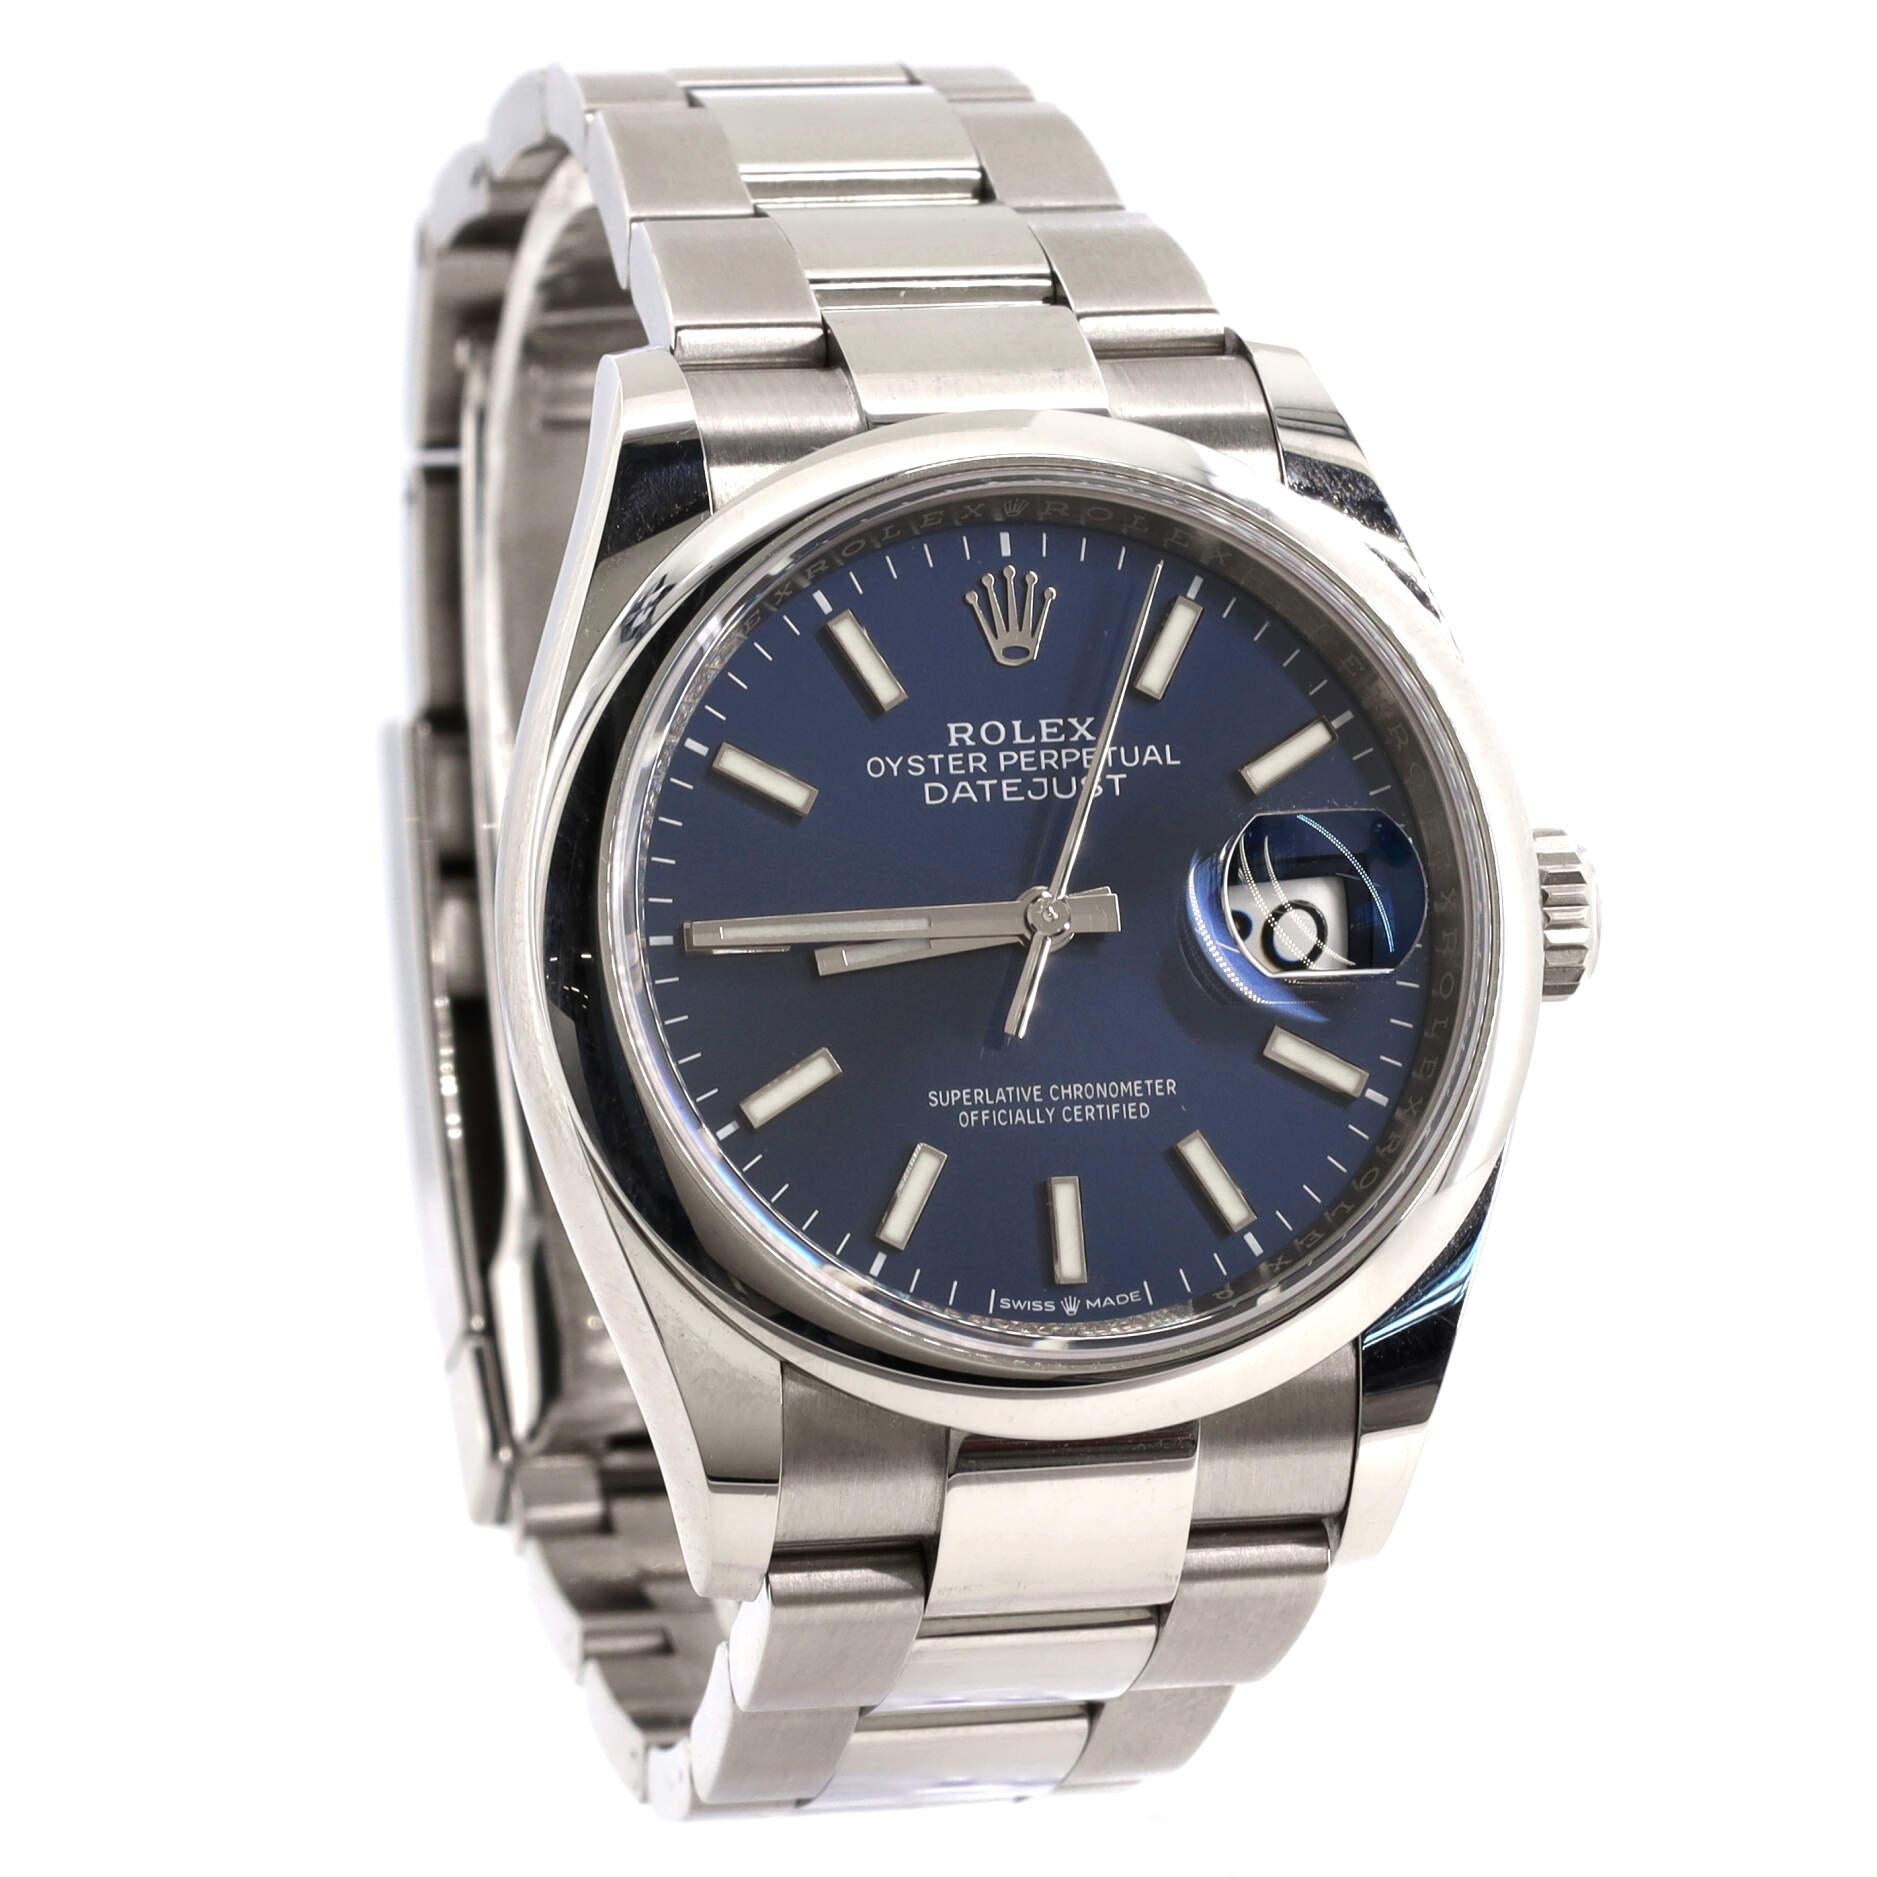 Rolex Oyster Perpetual Datejust Automatic Watch Stainless Steel and White Gold In Good Condition For Sale In New York, NY